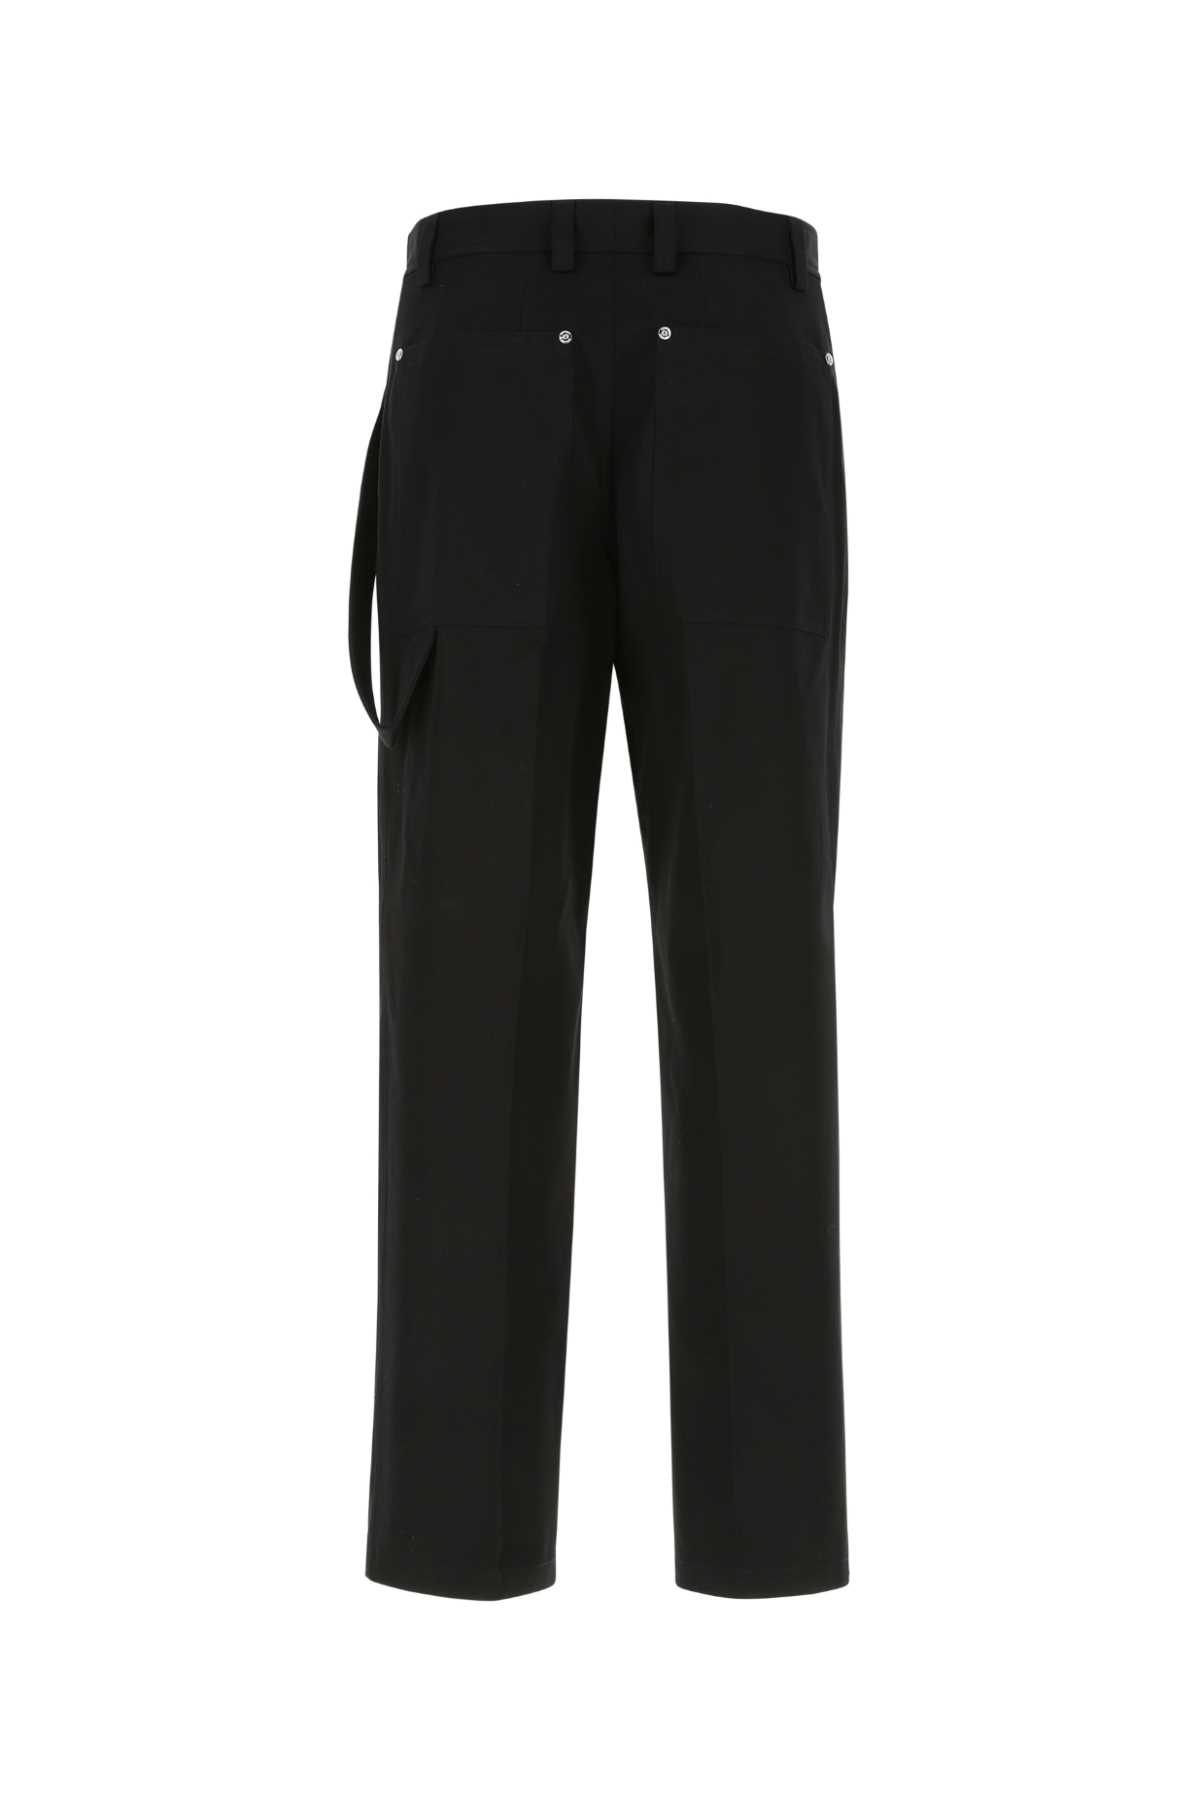 Burberry Black Cotton Wide-leg Pant In A1189